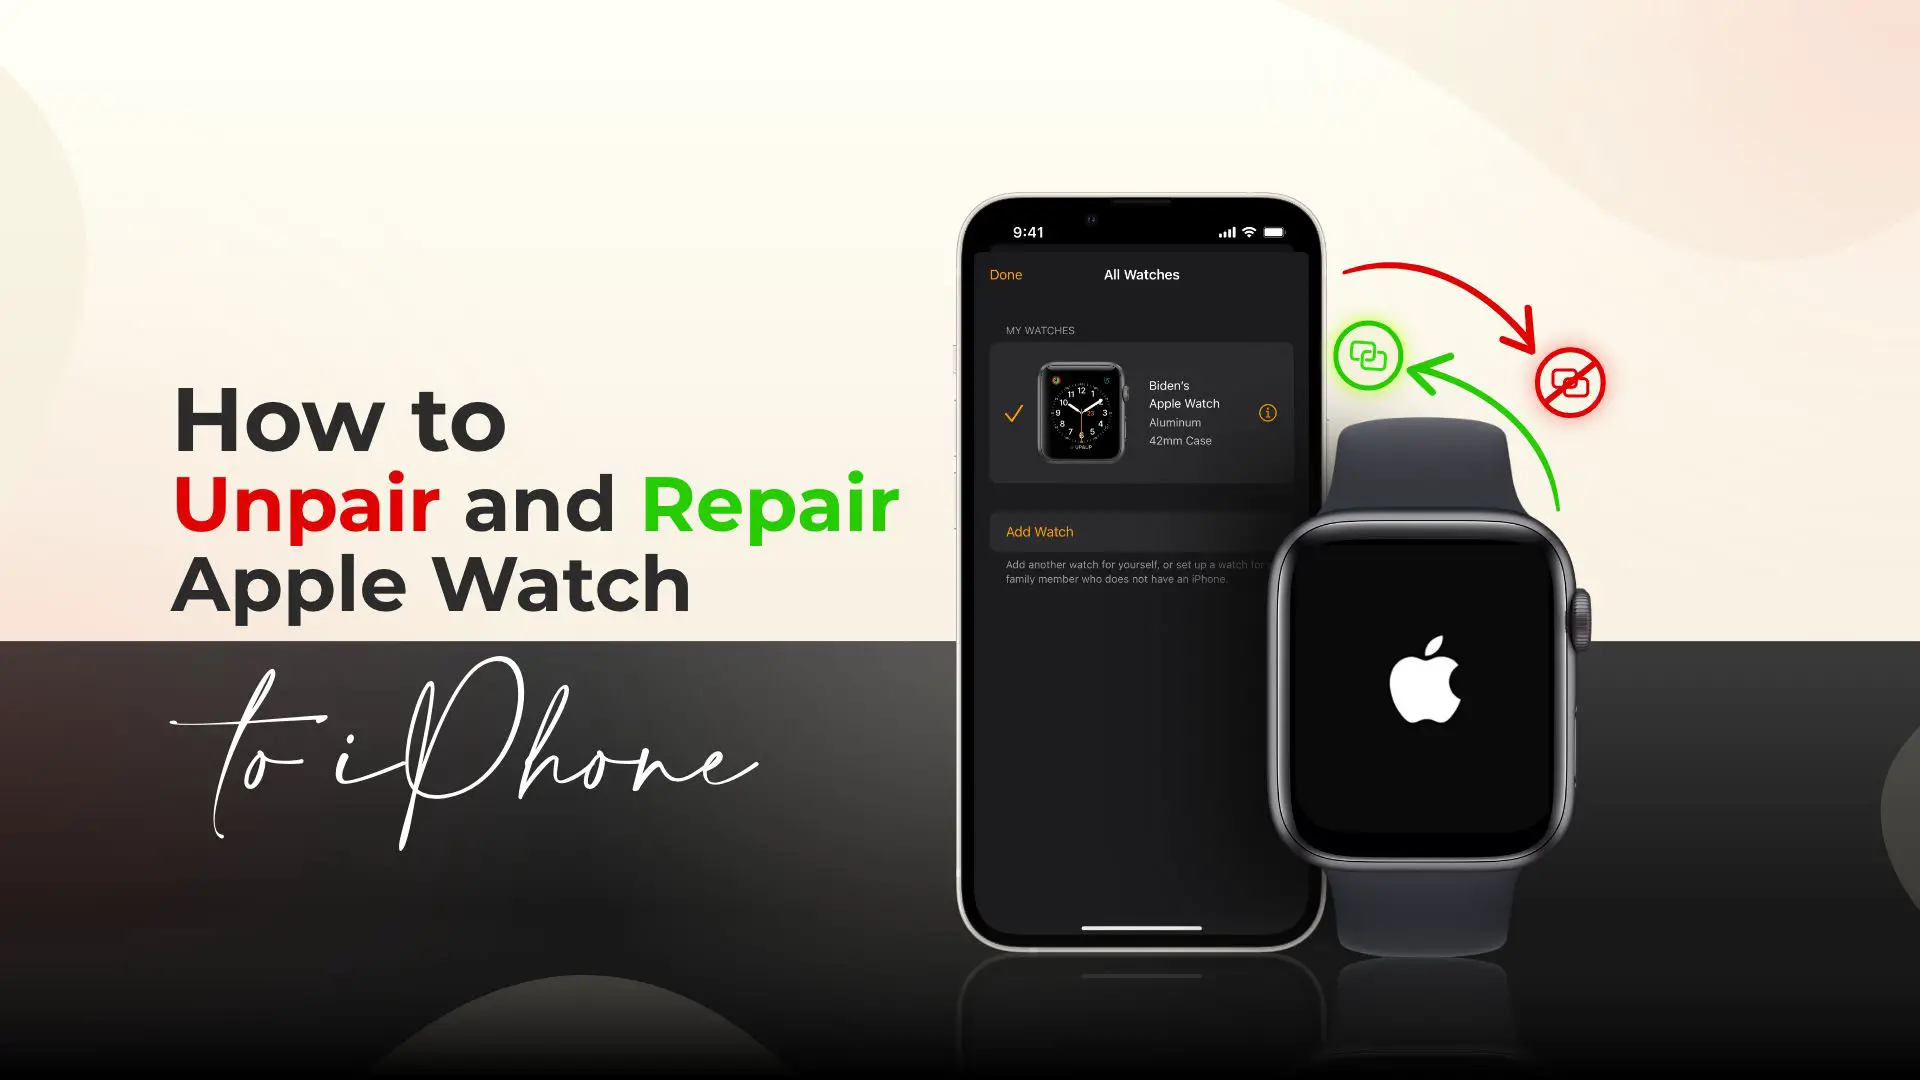 How to Unpair and Re-pair Apple Watch to iPhone without Erasing Data